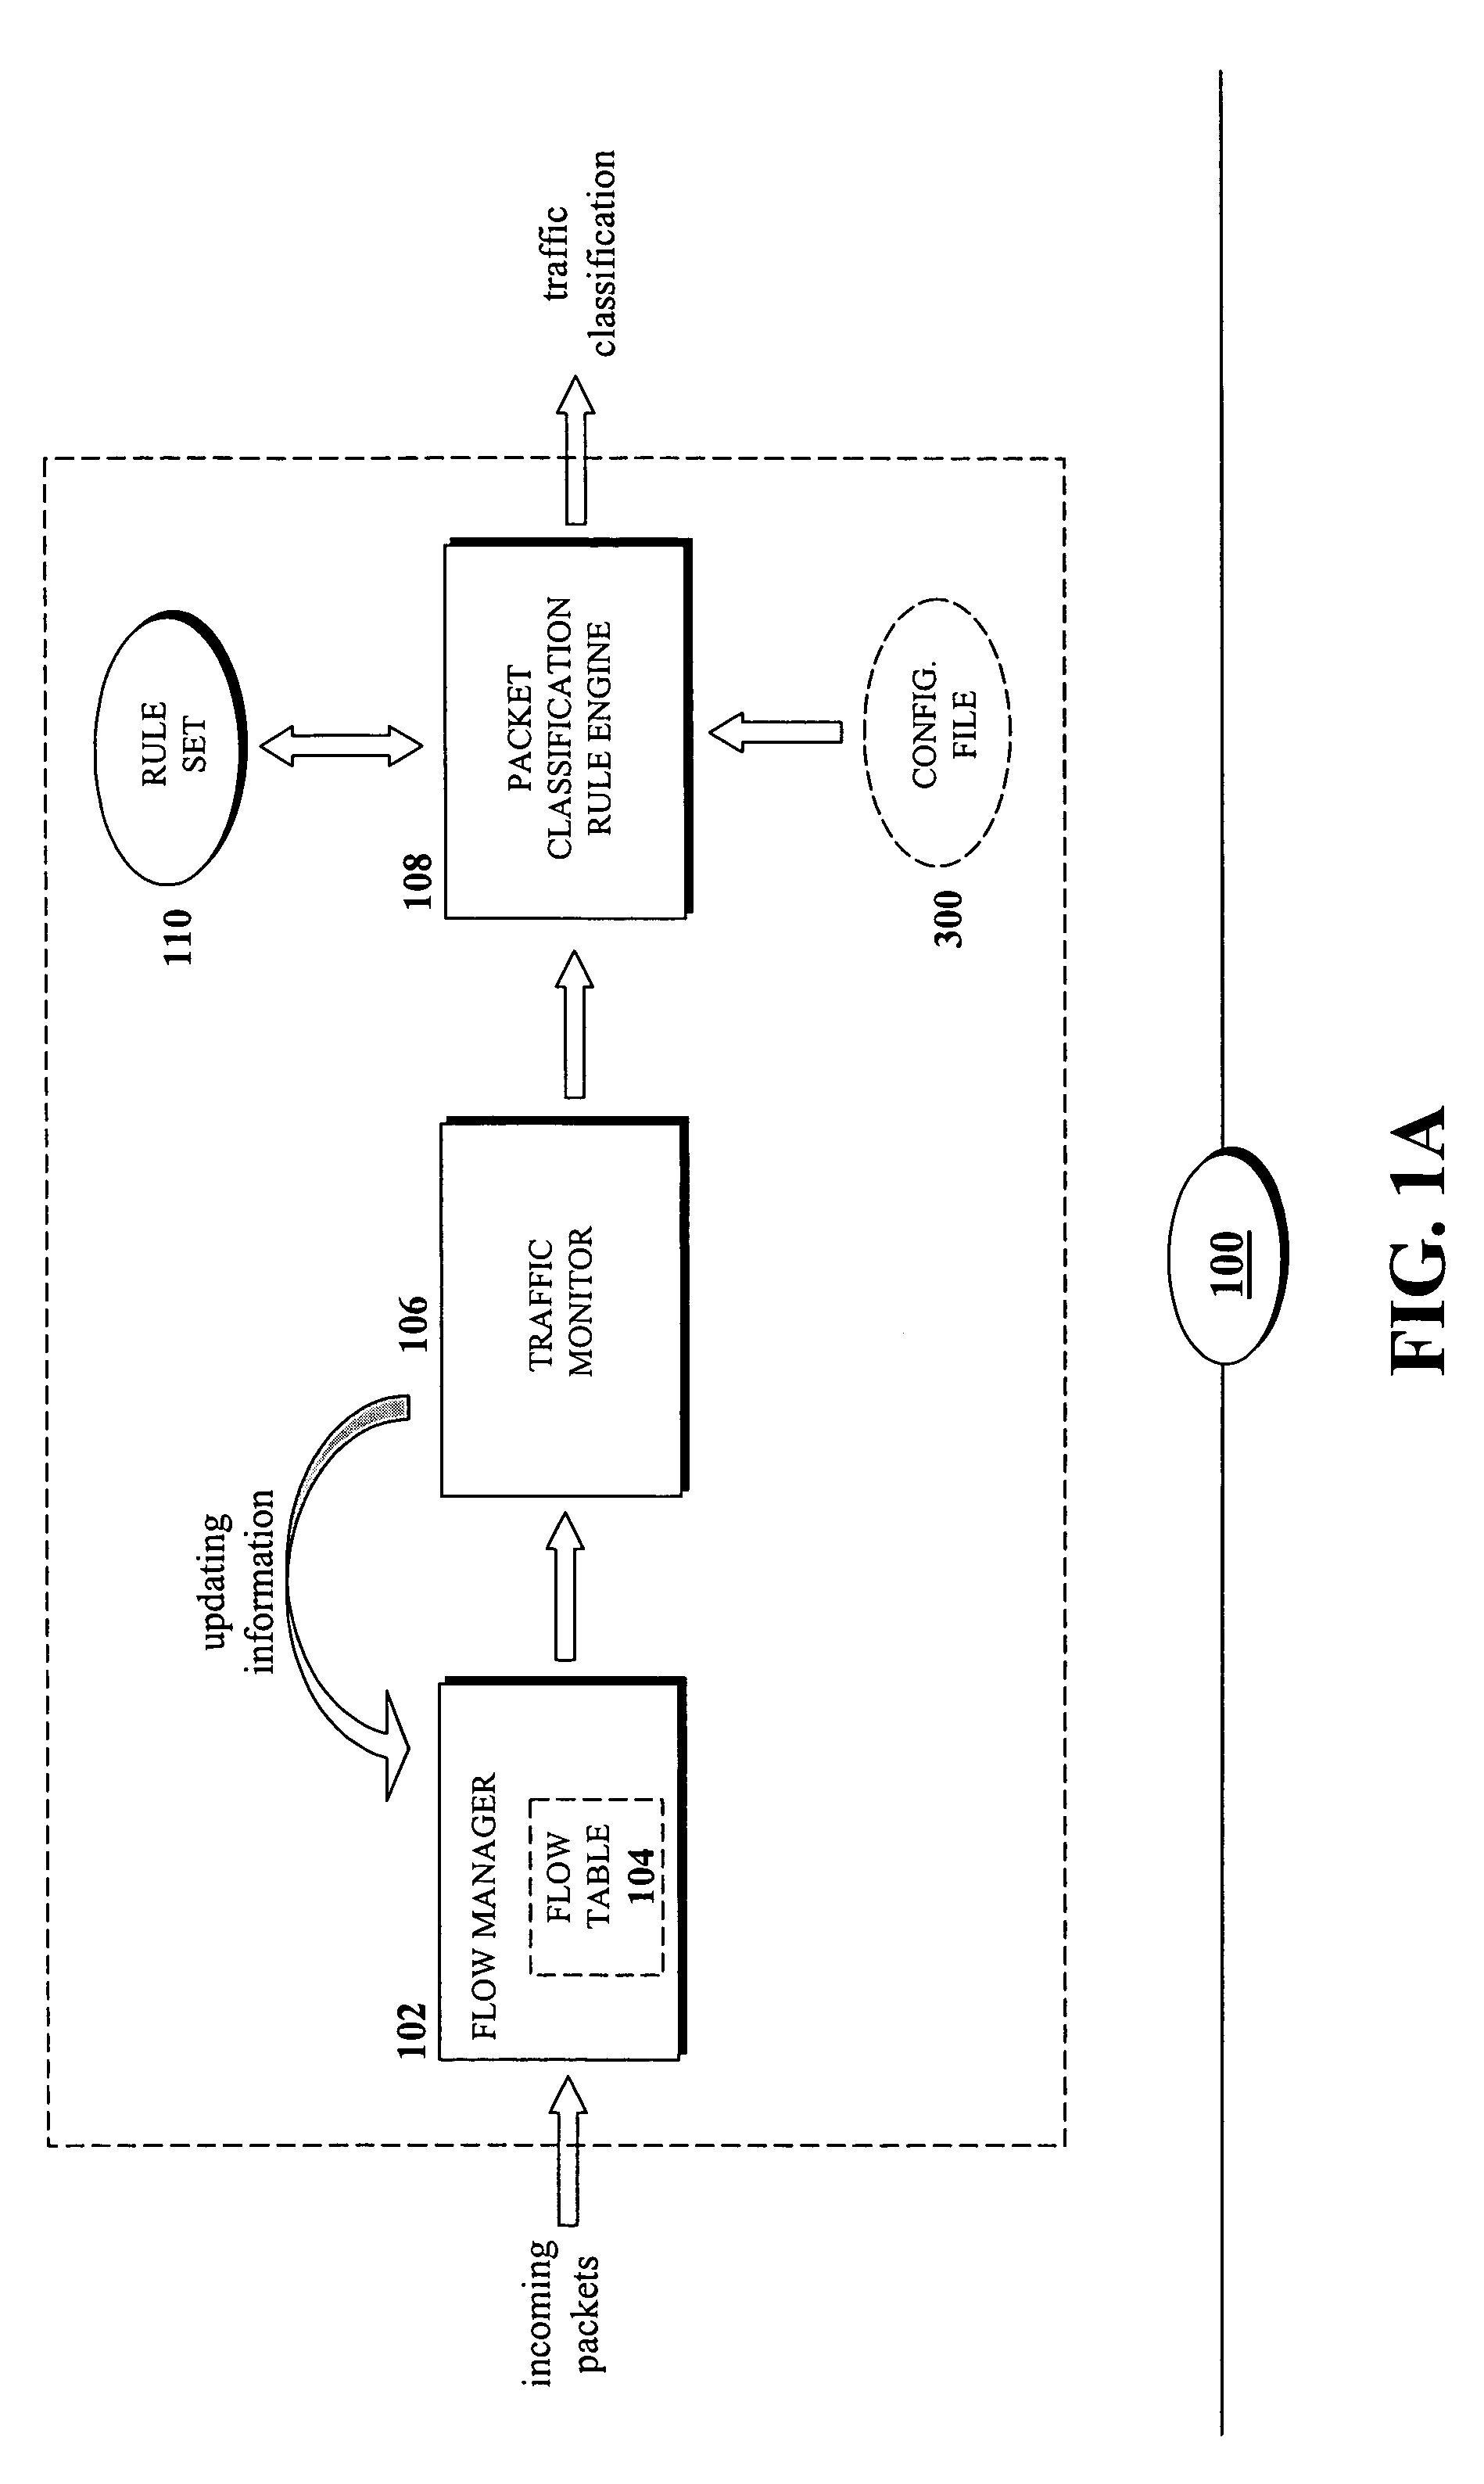 Configurable rule-engine for layer-7 and traffic characteristic-based classification